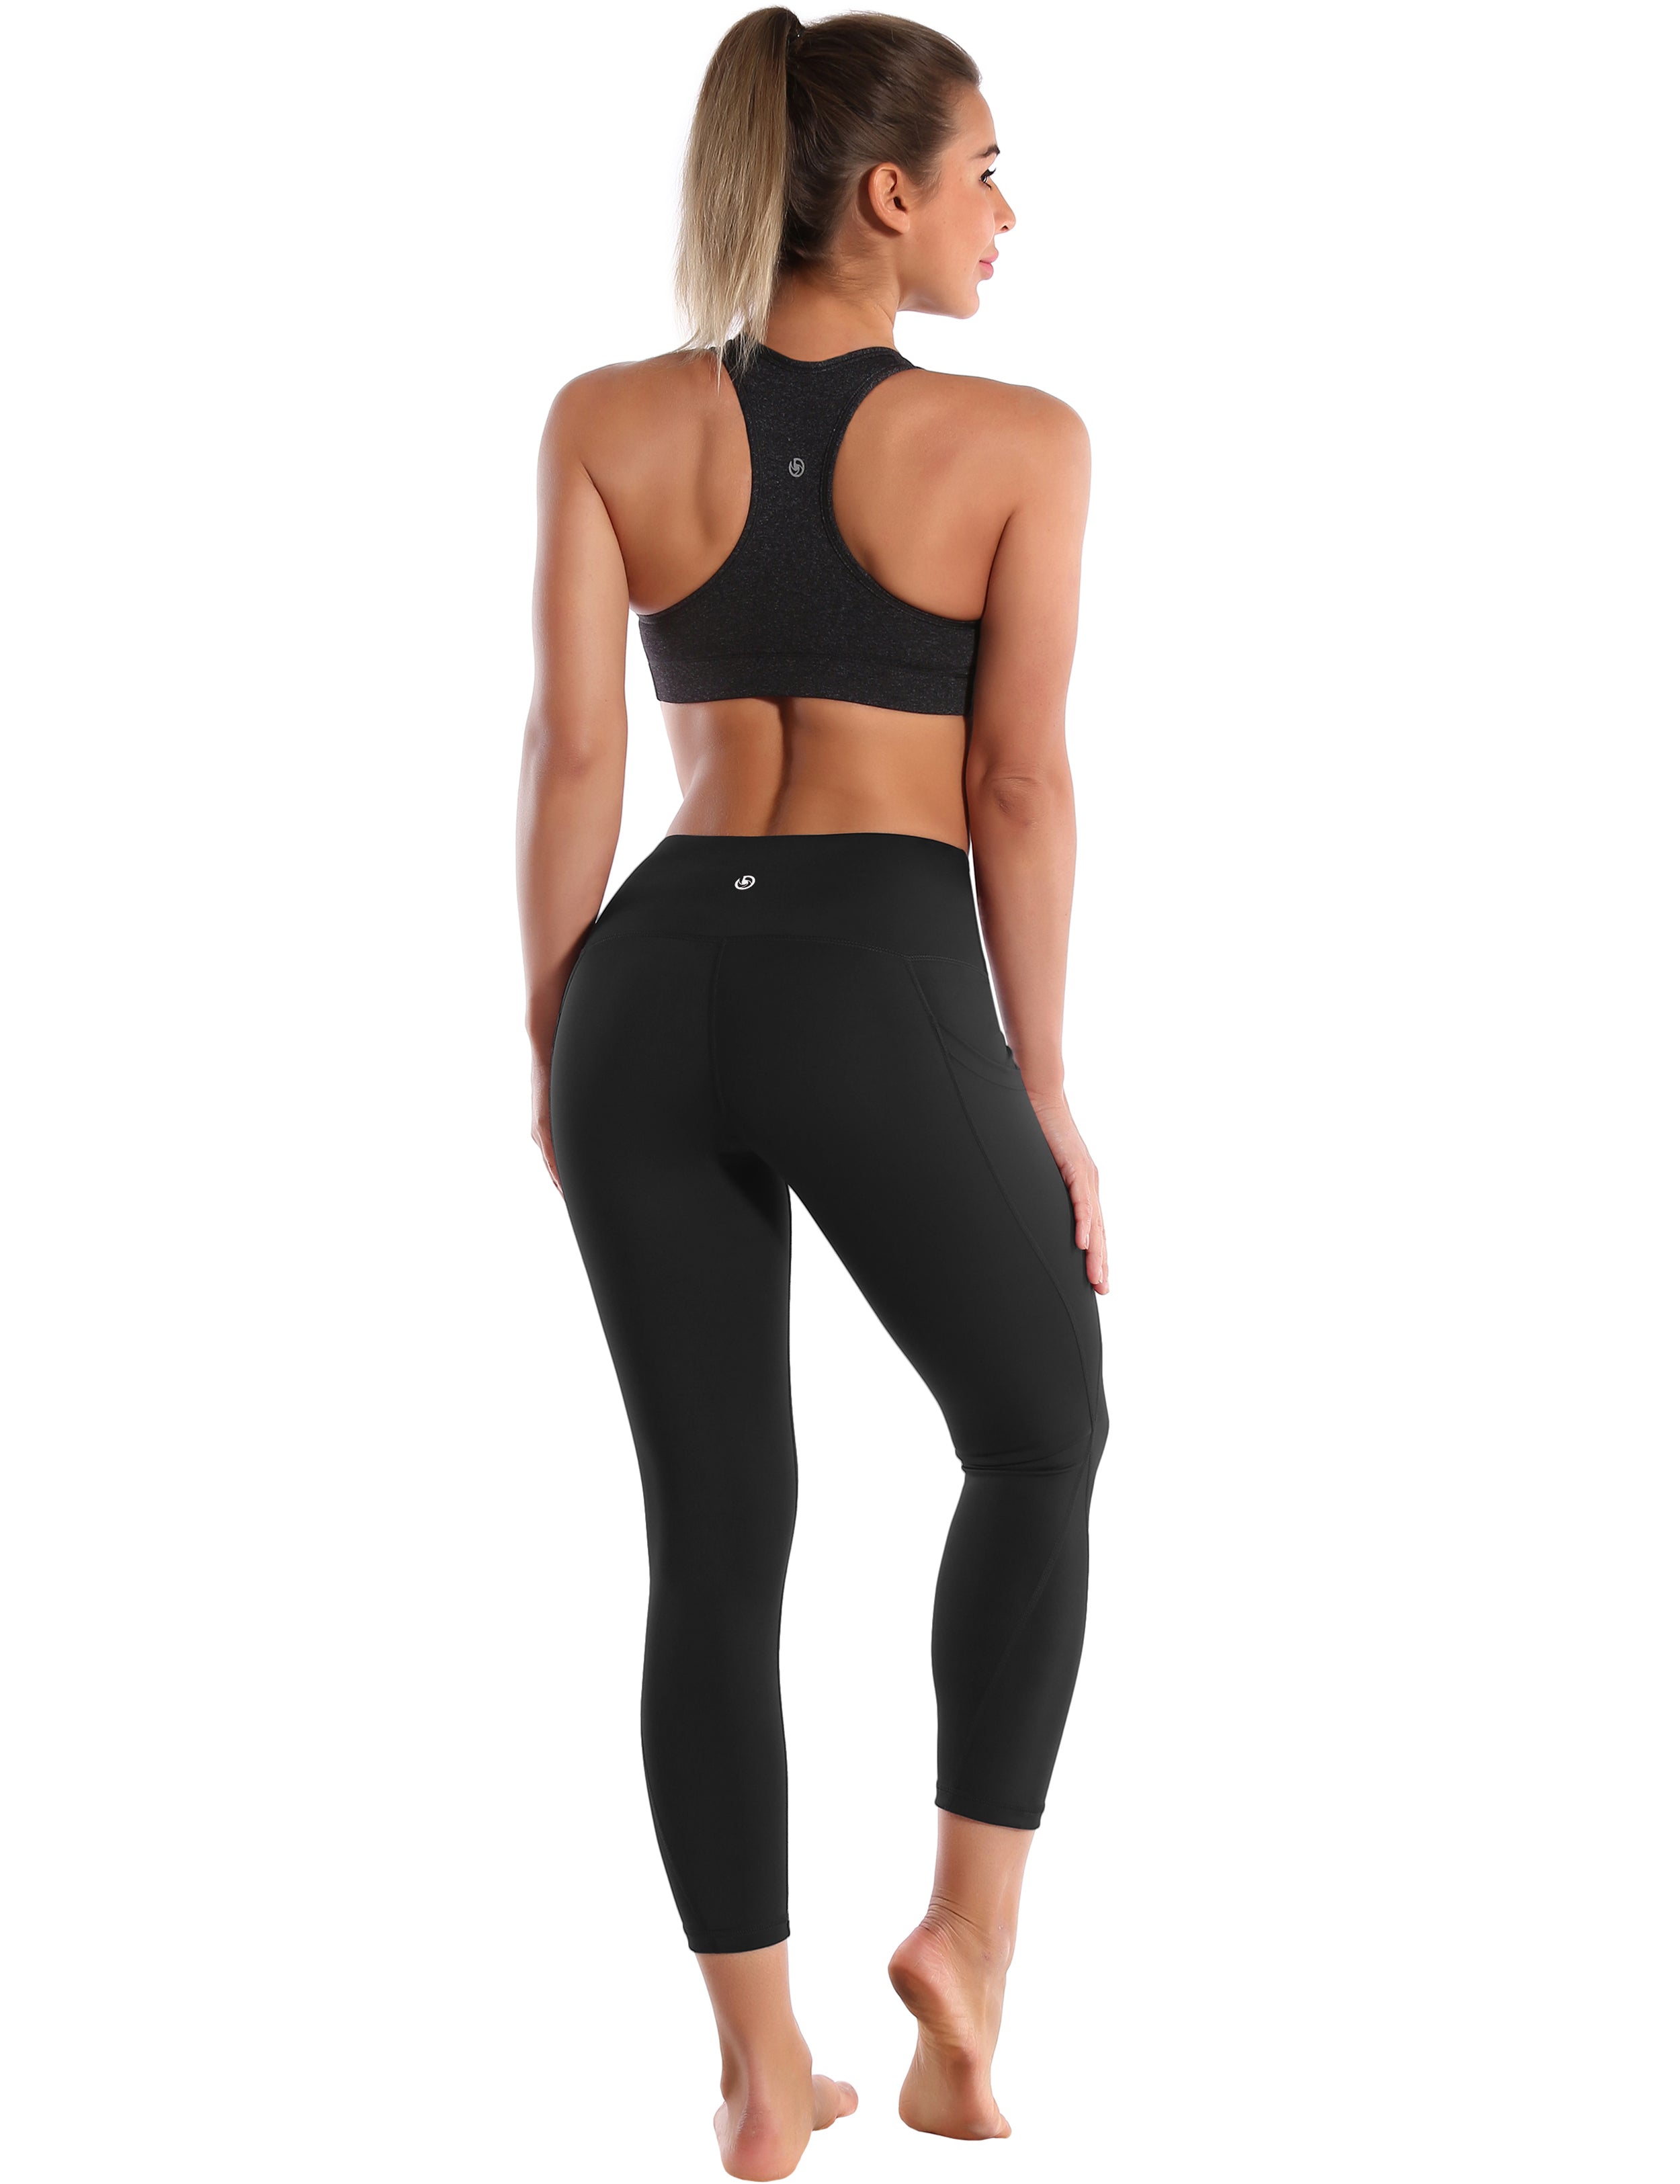 22" High Waist Side Pockets Capris black 75%Nylon/25%Spandex Fabric doesn't attract lint easily 4-way stretch No see-through Moisture-wicking Tummy control Inner pocket